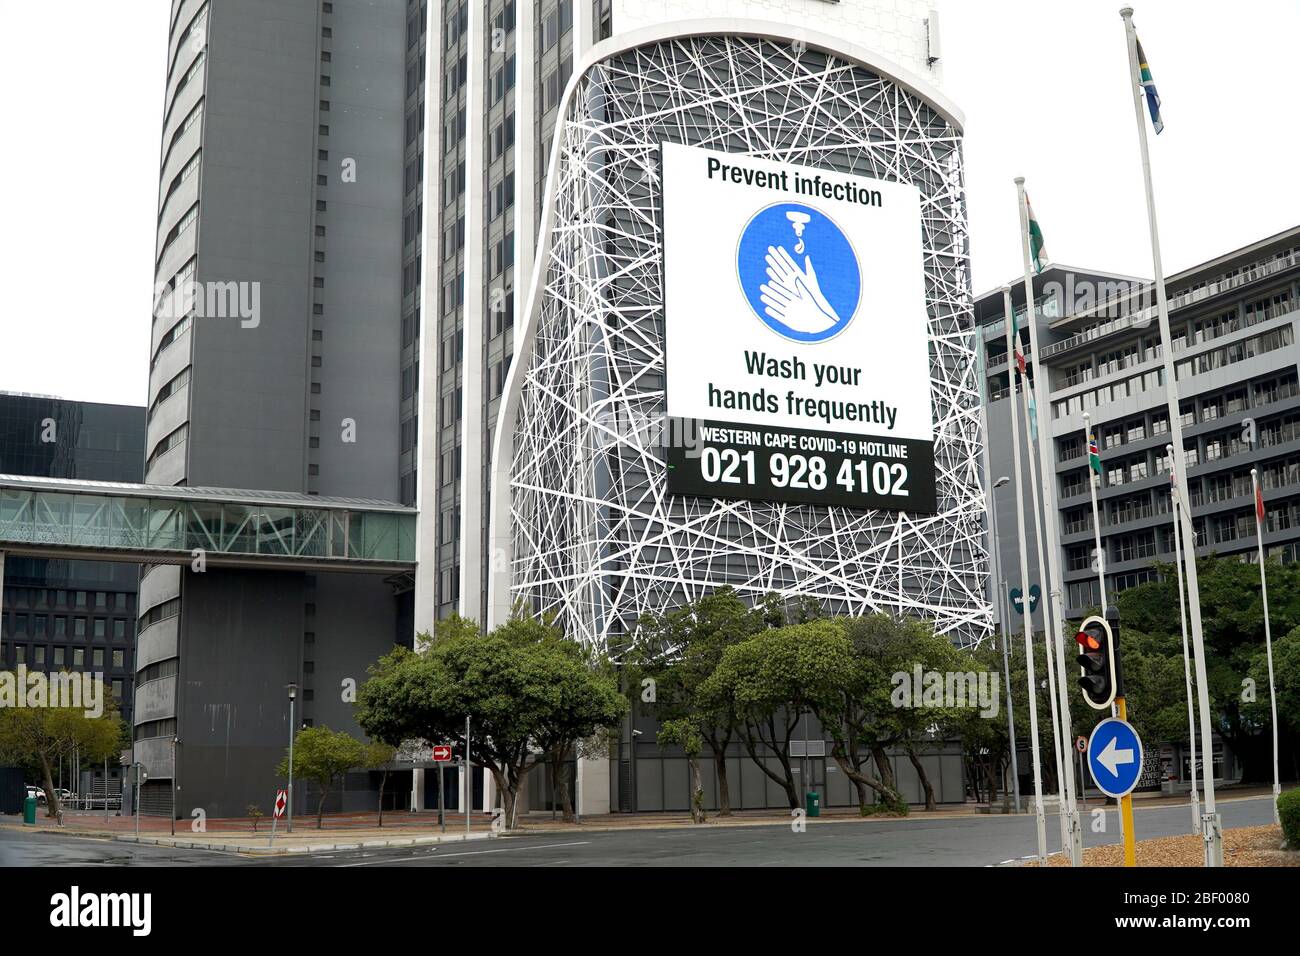 Cape Town, South Africa - 16 April 2020 : Hand washing sign on a buikding on an office building in Cape Town, South Africa Stock Photo